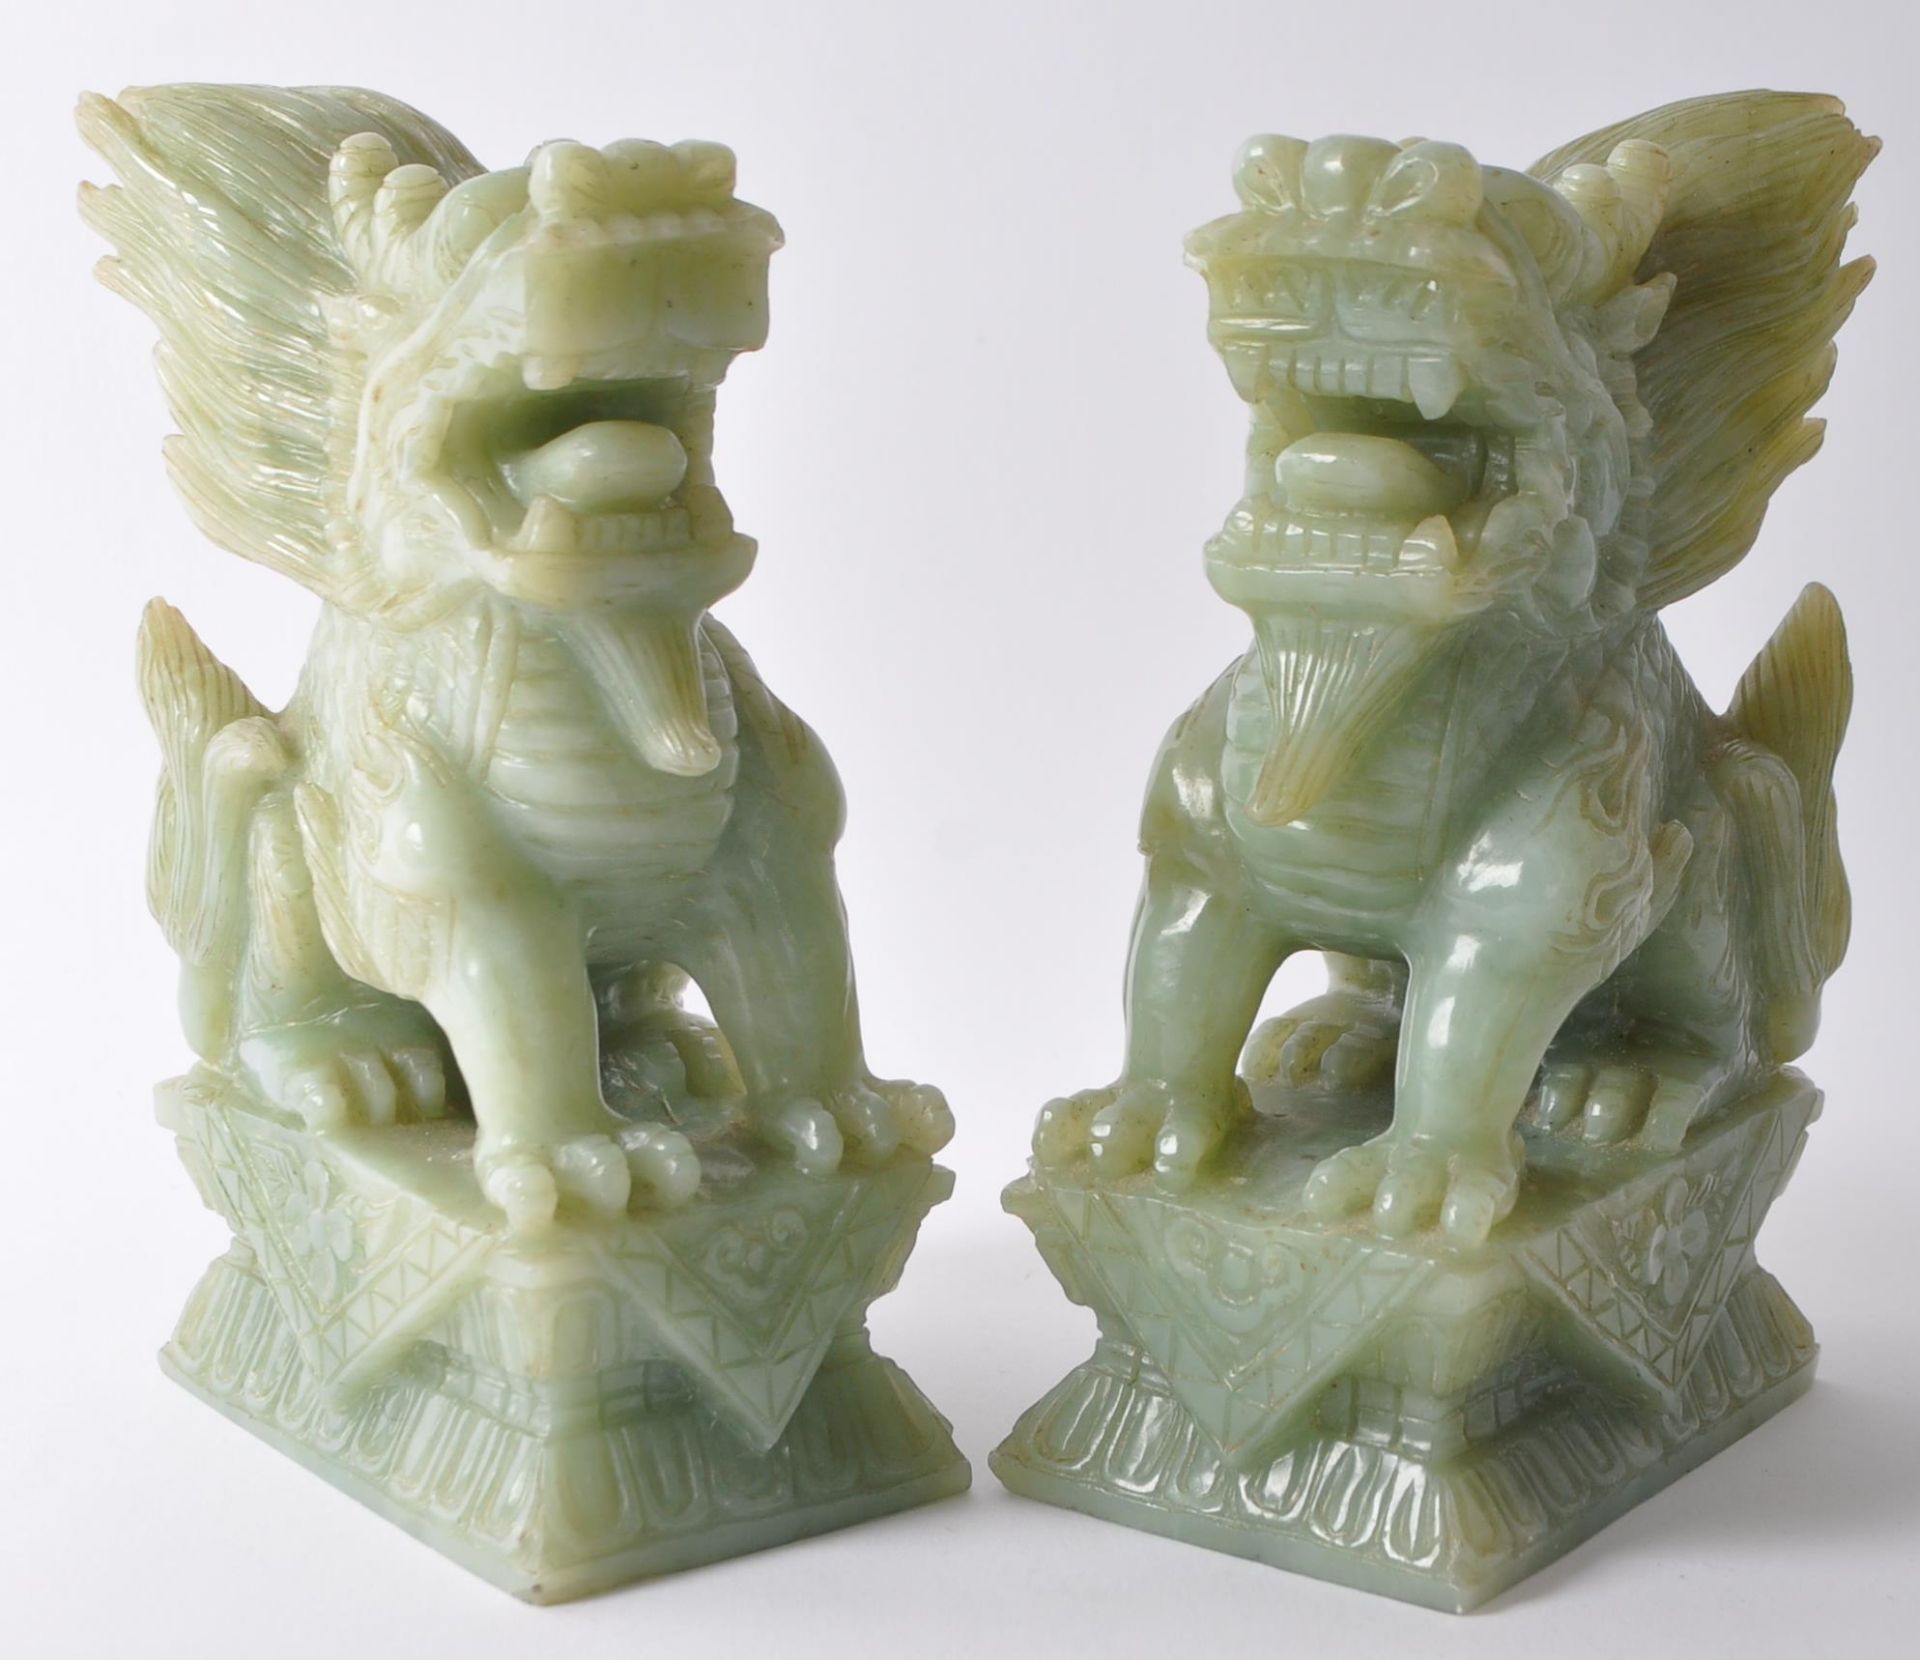 PAIR OF VINTAGE 20TH CENTURY CARVED STONE FU TEMPLE DOGS